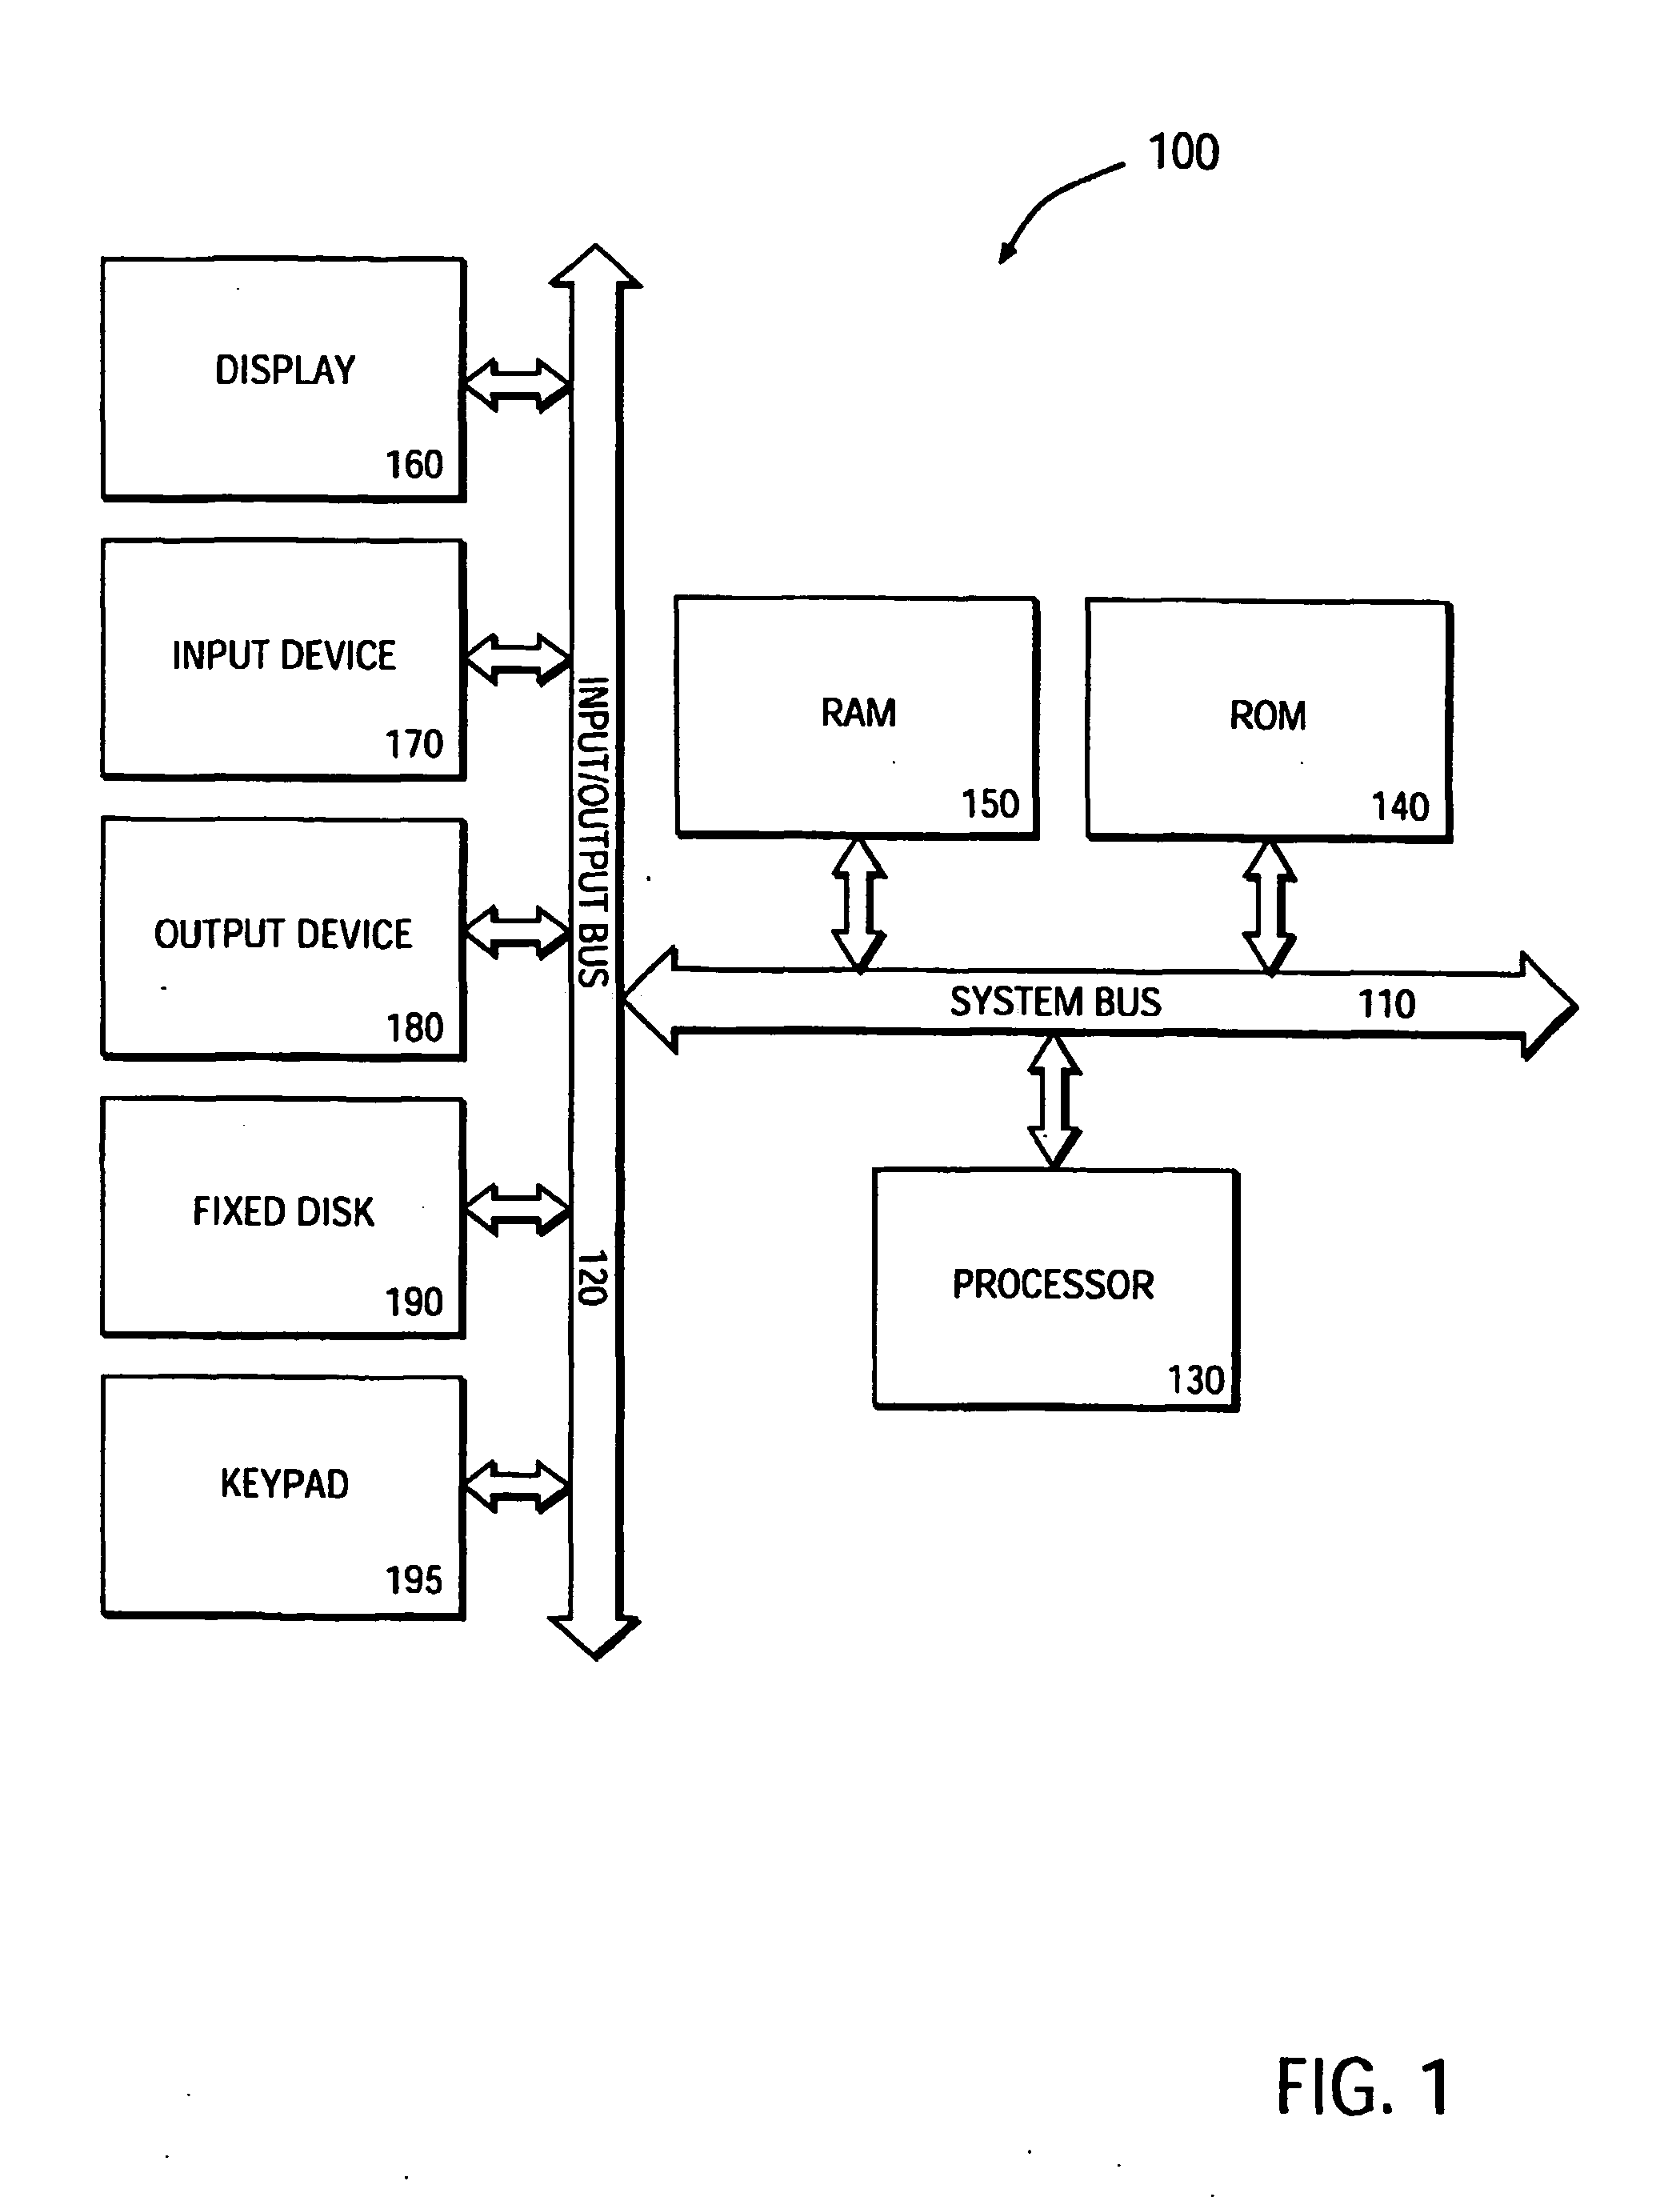 Method and apparatus for frame-based knowledge representation in the unified modeling language (uml)